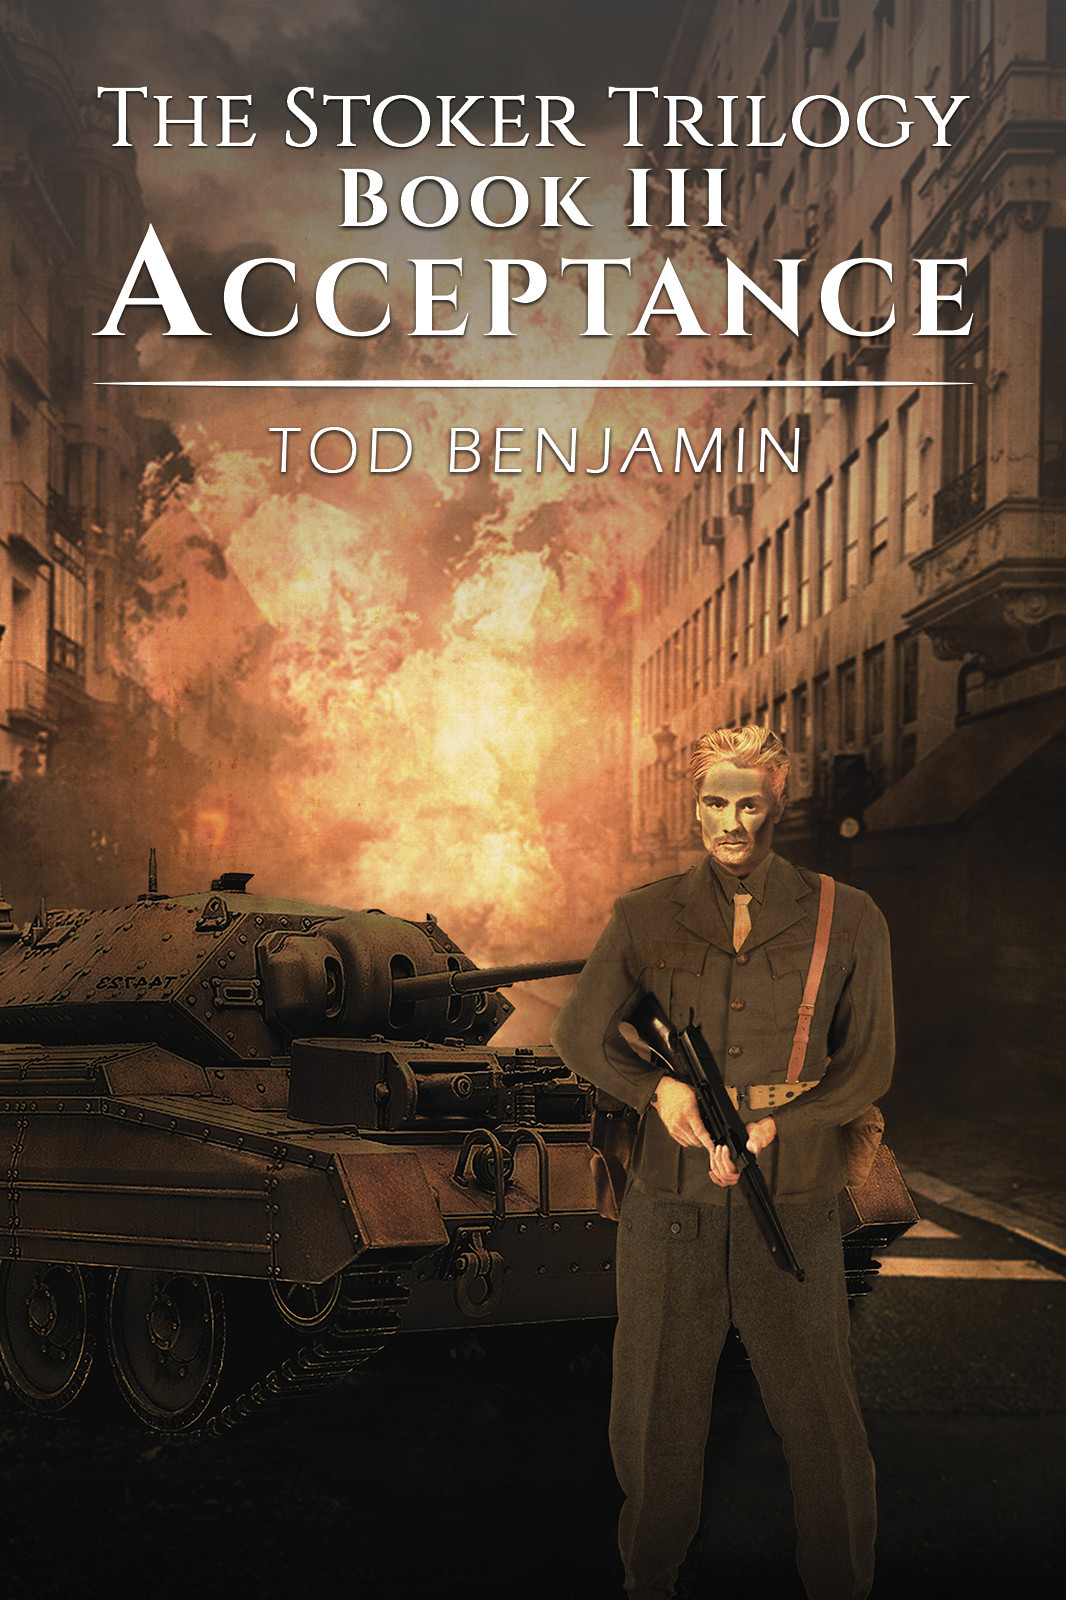 The Stoker Trilogy, Book III - Acceptance